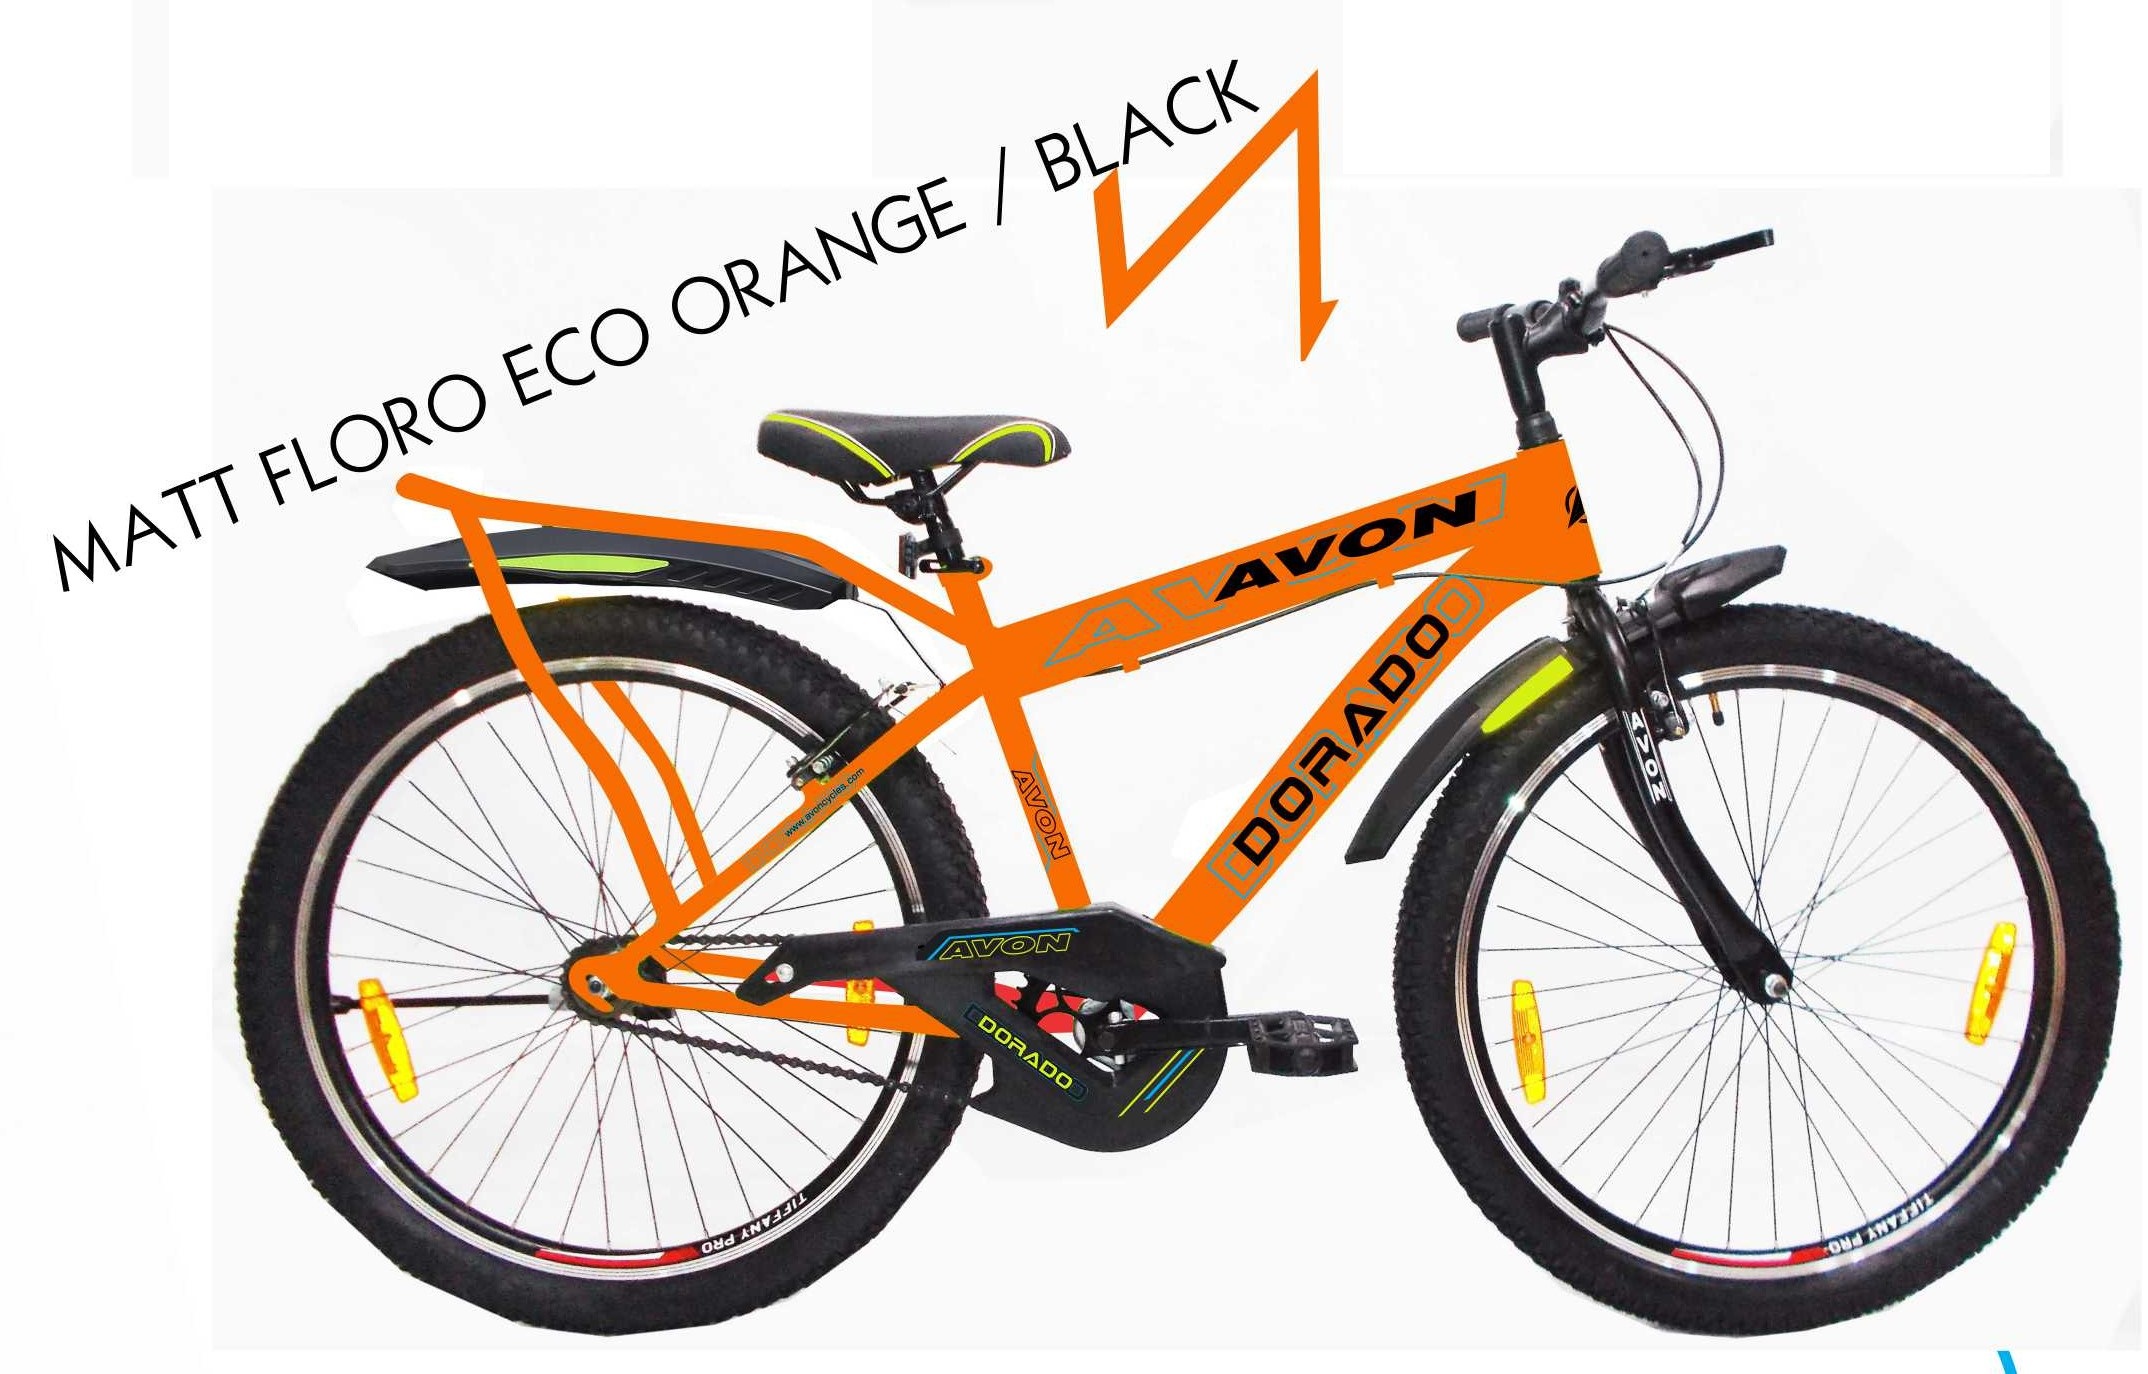 avon 24 inch cycle price